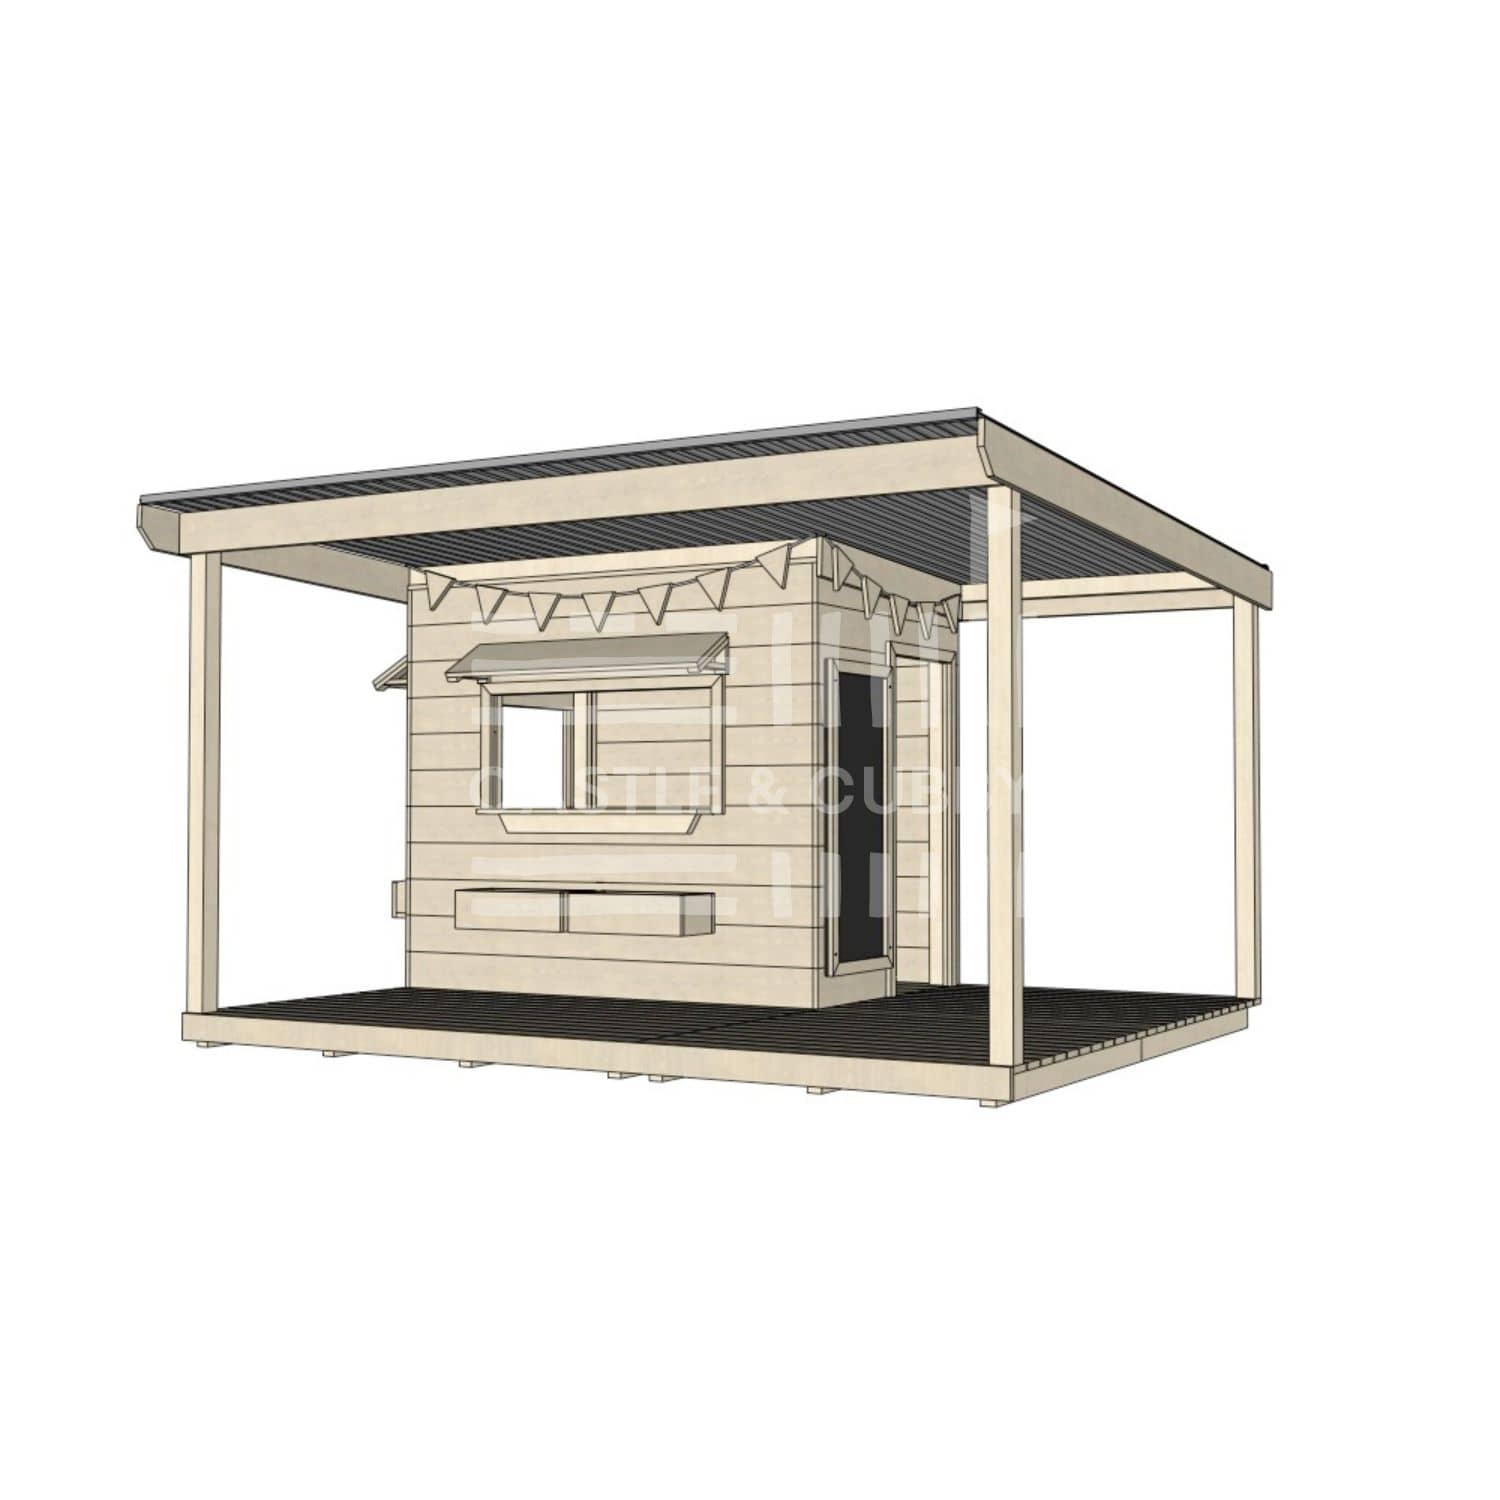 Commercial grade little rectangle timber cubby house with wraparound verandah and accessories